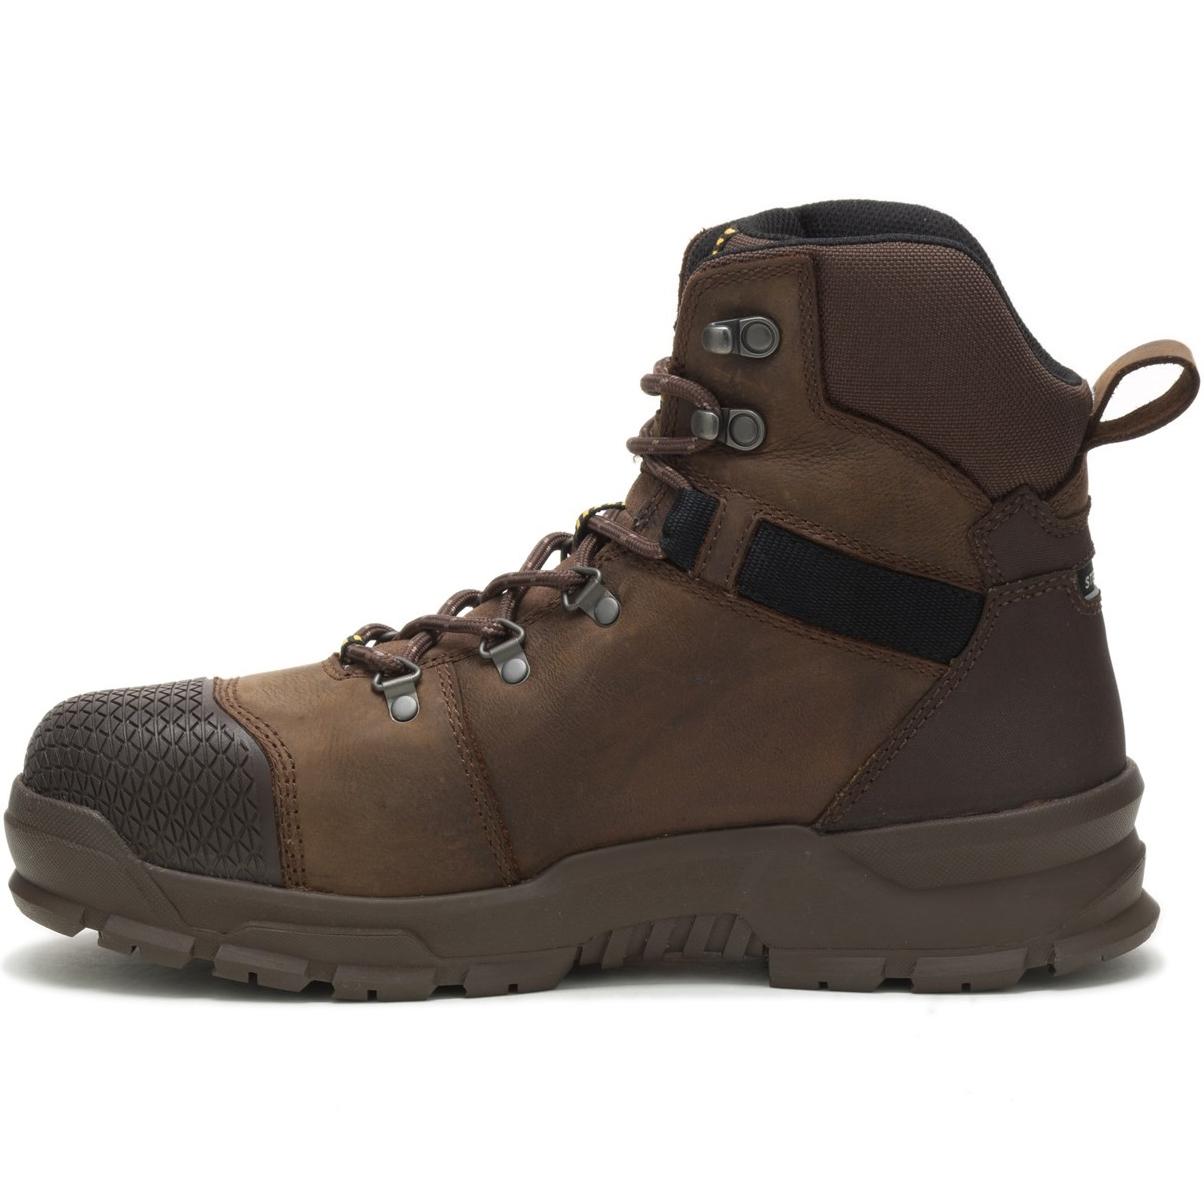 Cat Footwear Accomplice Safety Boot